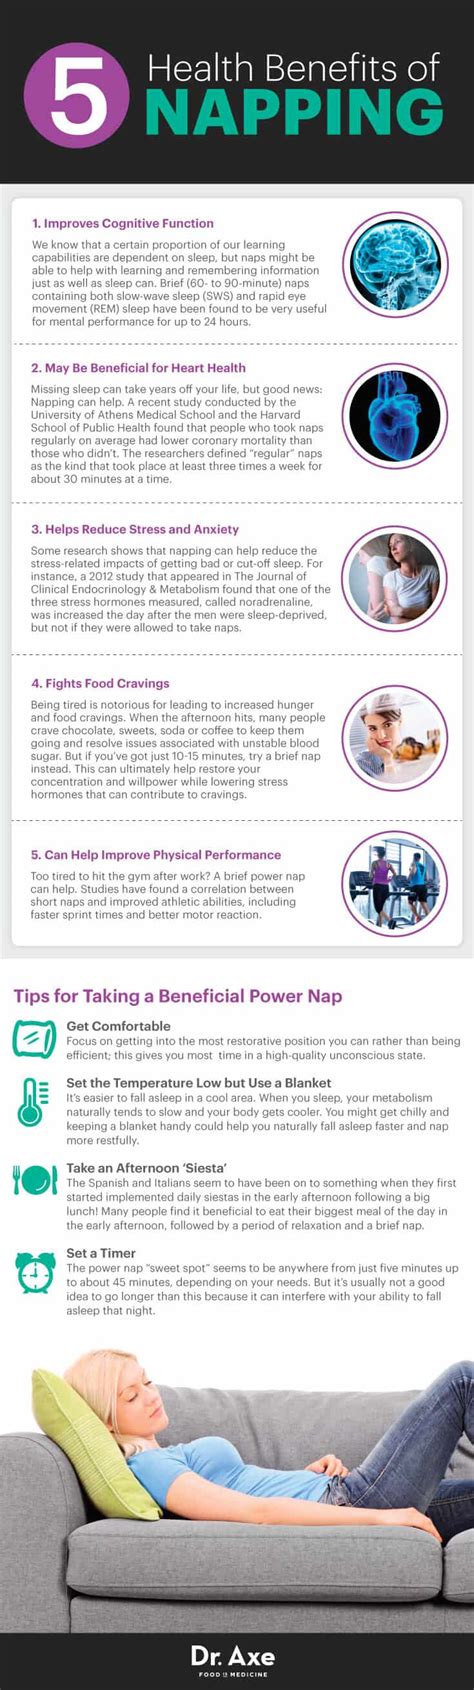 Is Napping Good Or Bad For You The Science Behind A Power Nap Dr Axe